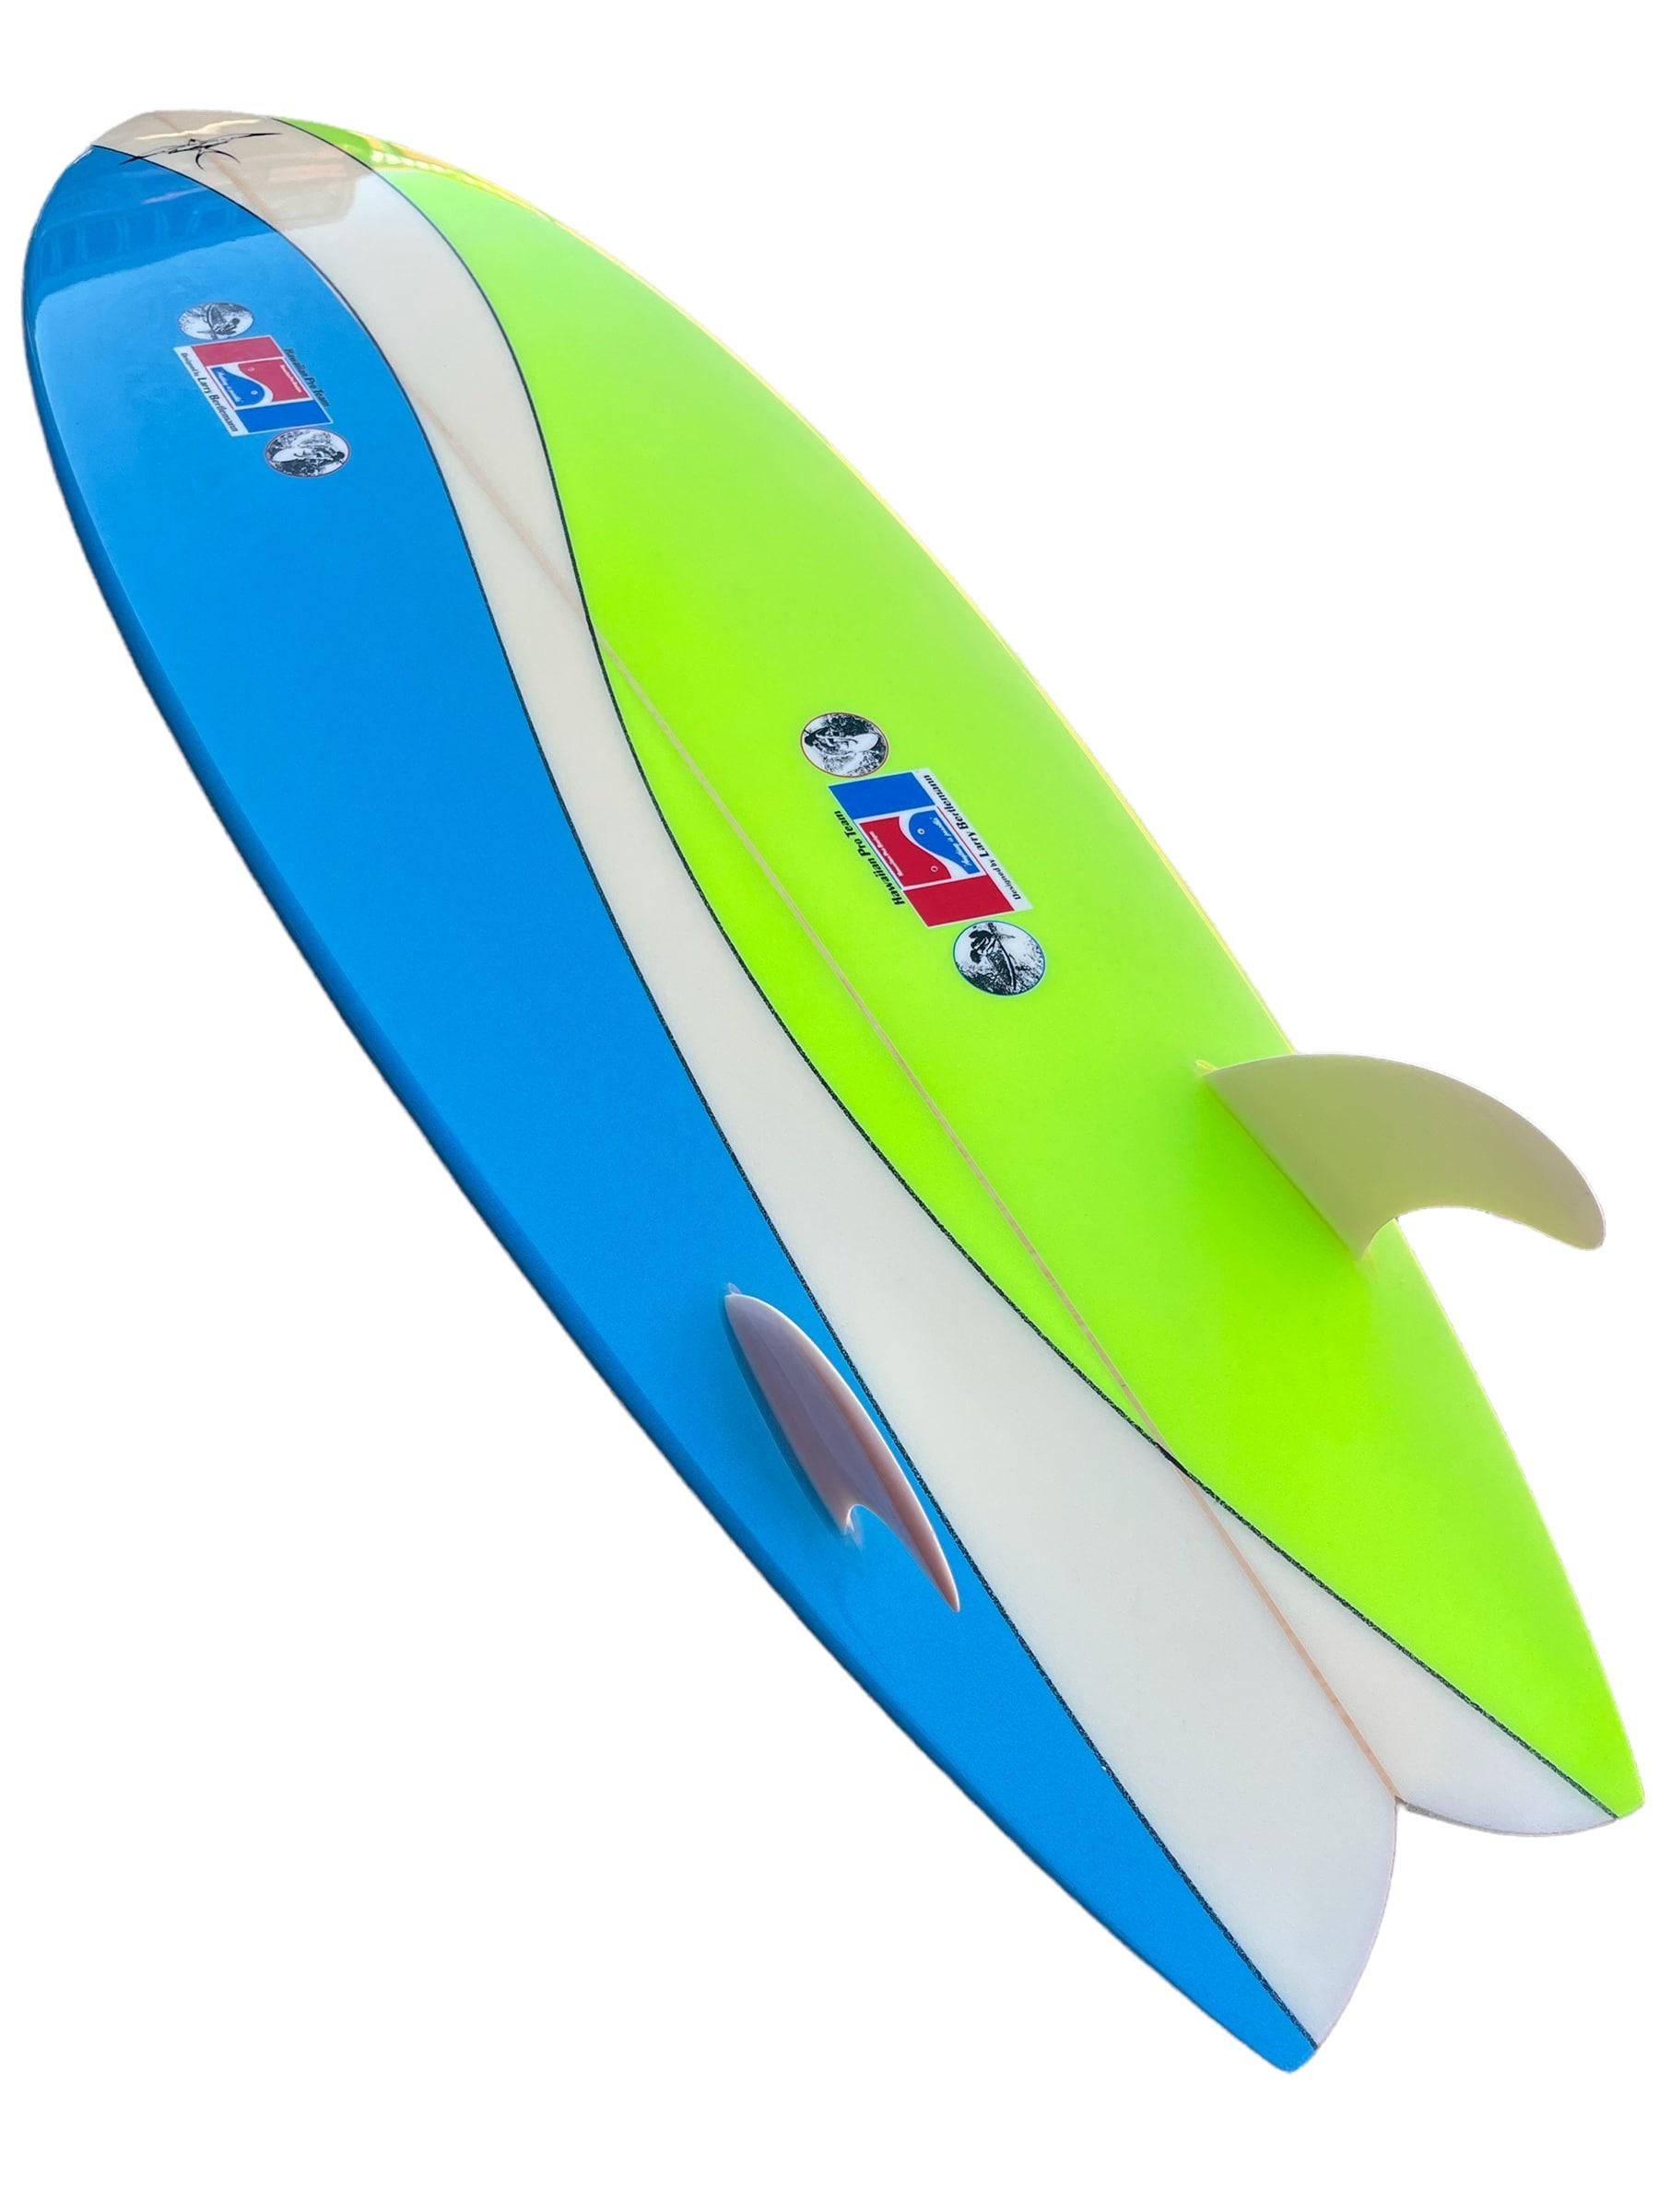 2001 Larry Bertlemann Hawaiian Pro Team 5’6 twin-fin shortboard. Hand shaped by the late Donald Takayama (1943-2012). Features a beautiful bright blue/neon yellow airbrush design with glass-on on twin fin setup. Iconic Larry Bertlemann laminates